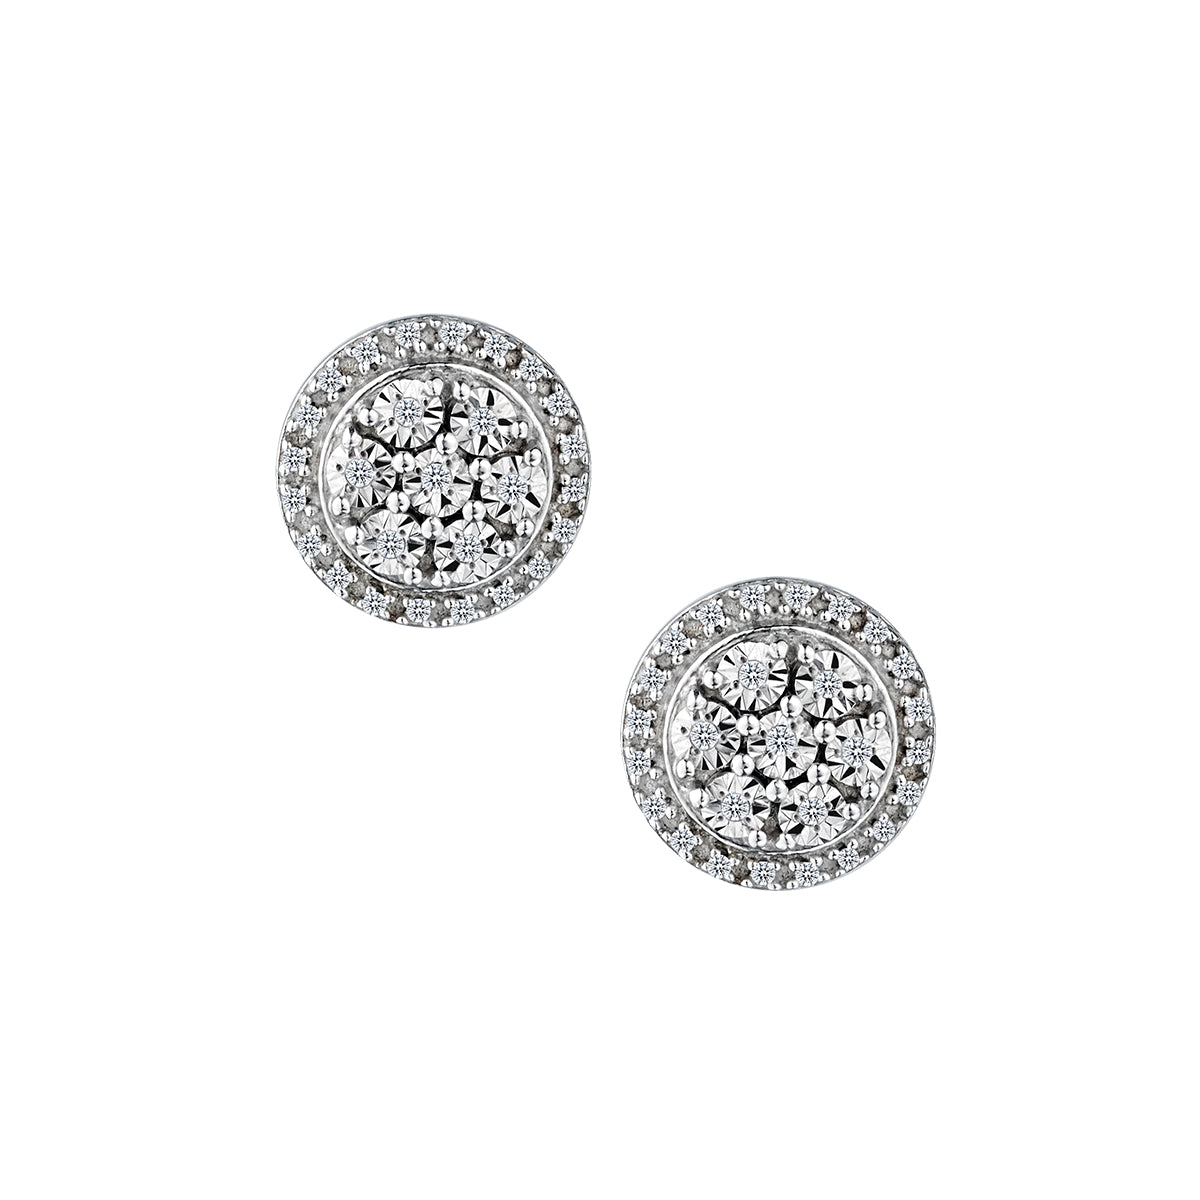 .10 Carat Round Diamond Earrings, Sterling Silver.......................NOW